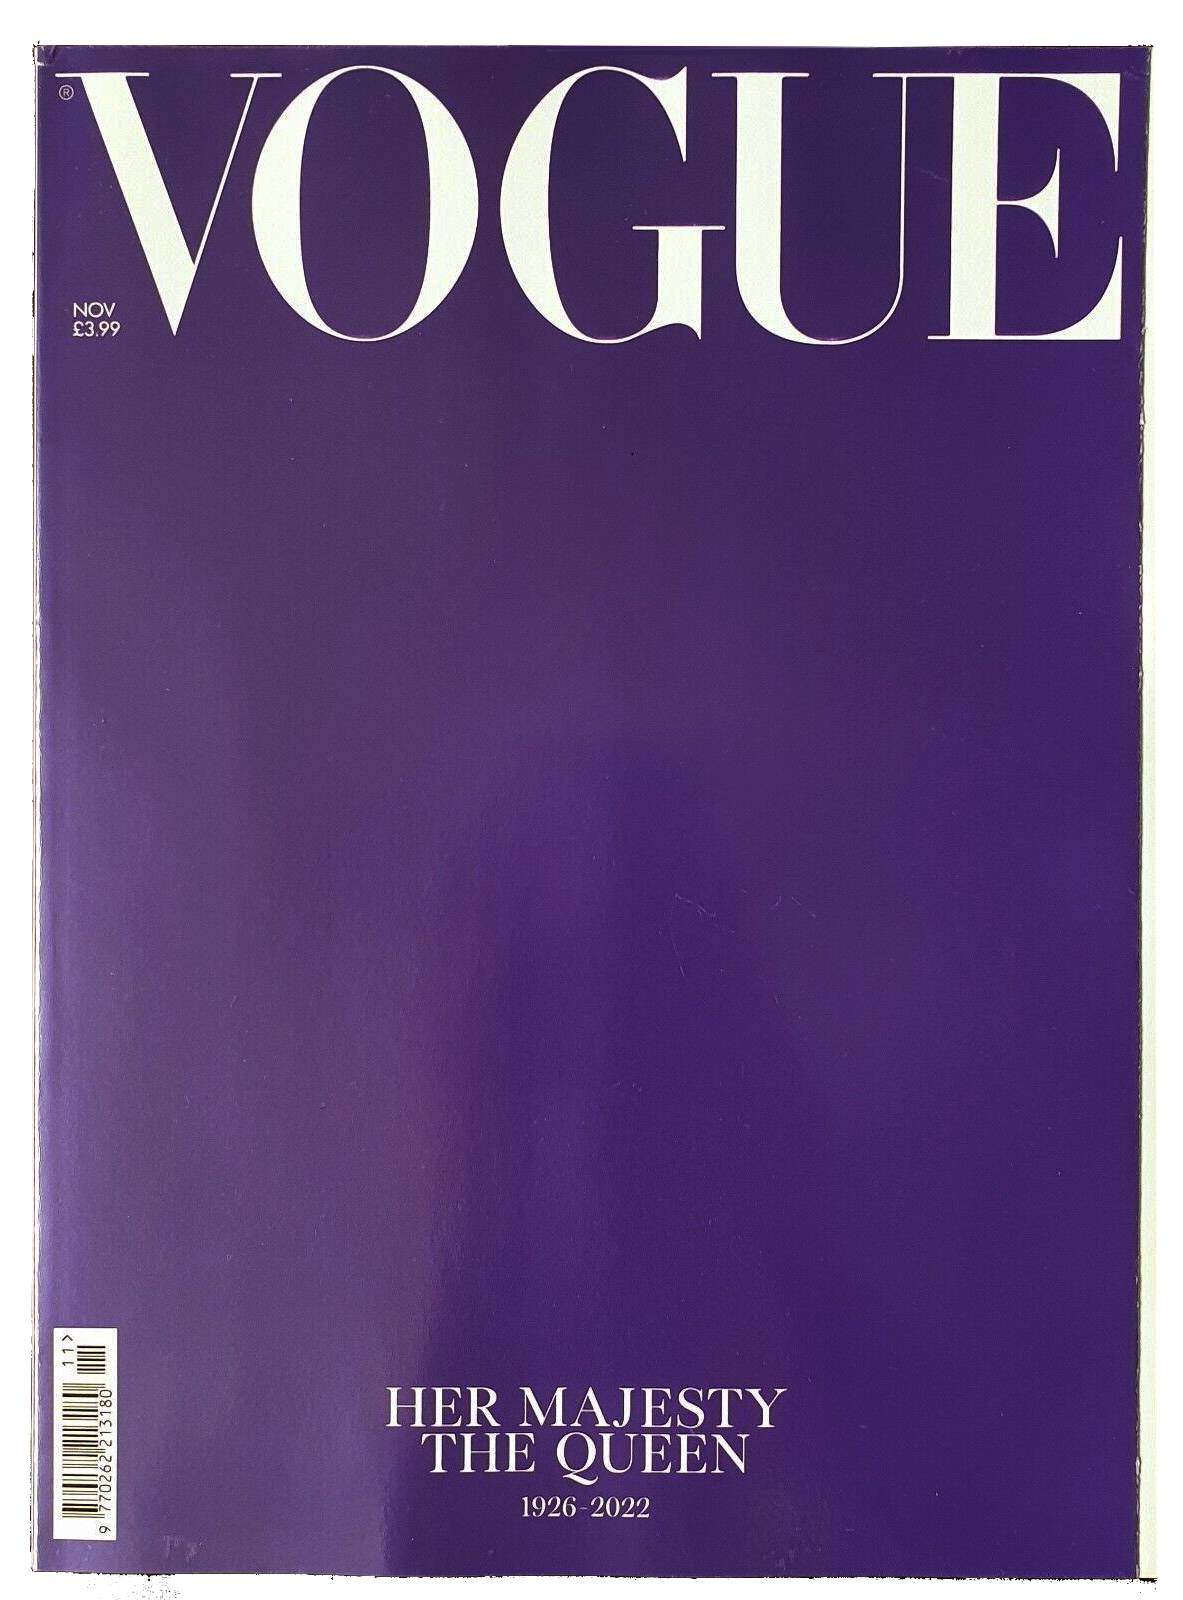 Vogue Magazine - "Her Majesty the Queen 1926-2022" - style - CHNGR